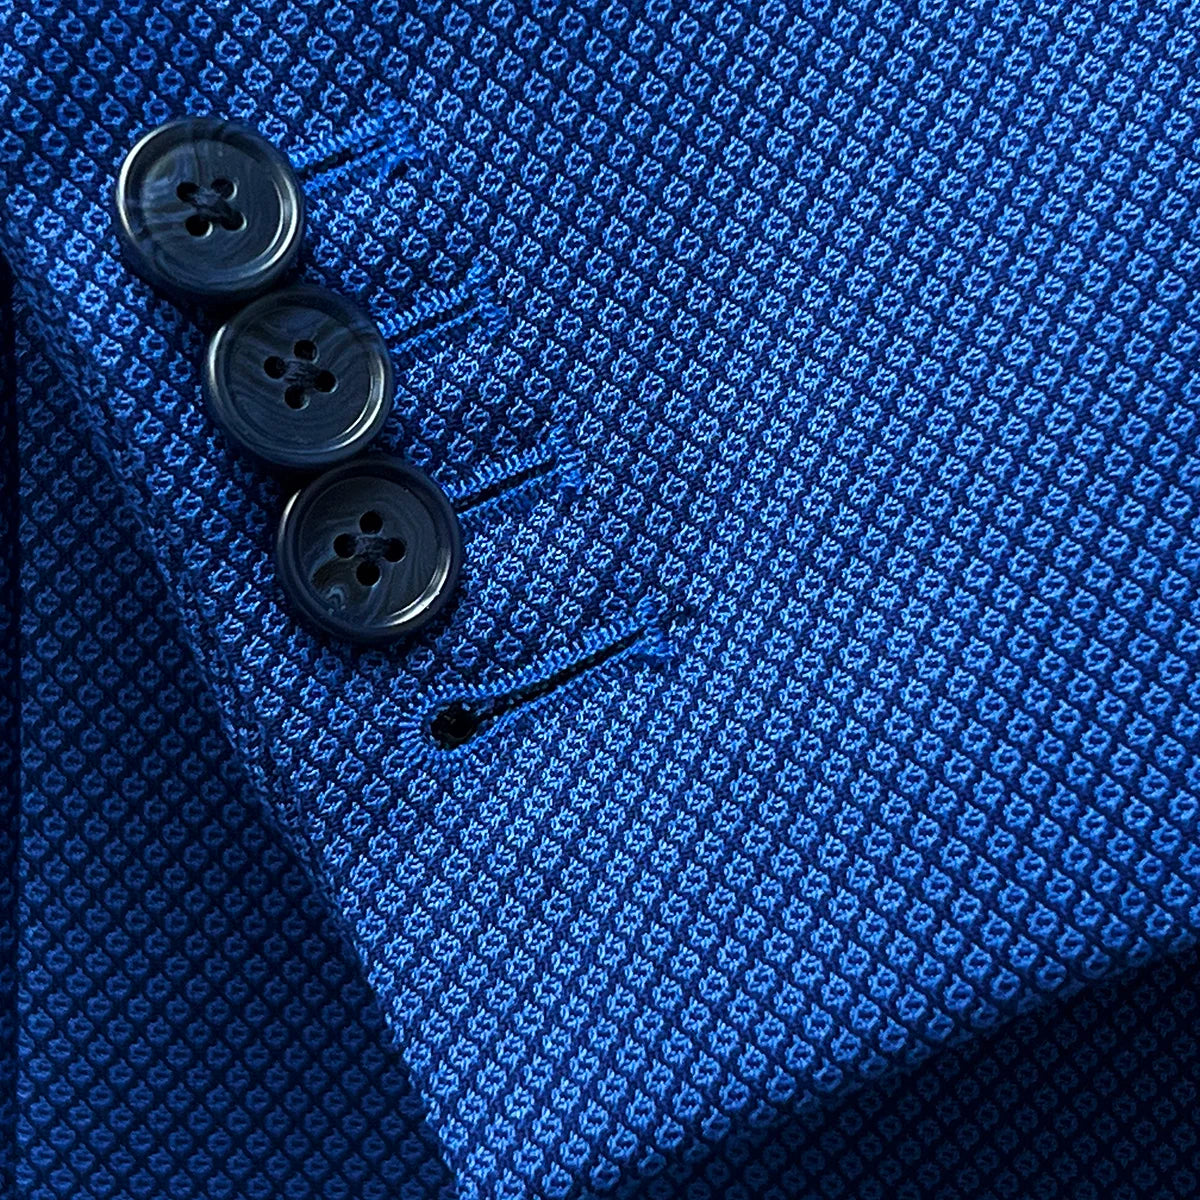 Close-up view showing the functional sleeve buttonholes with contrast stitching on the sapphire blue men's suit, enhancing its functionality and style.